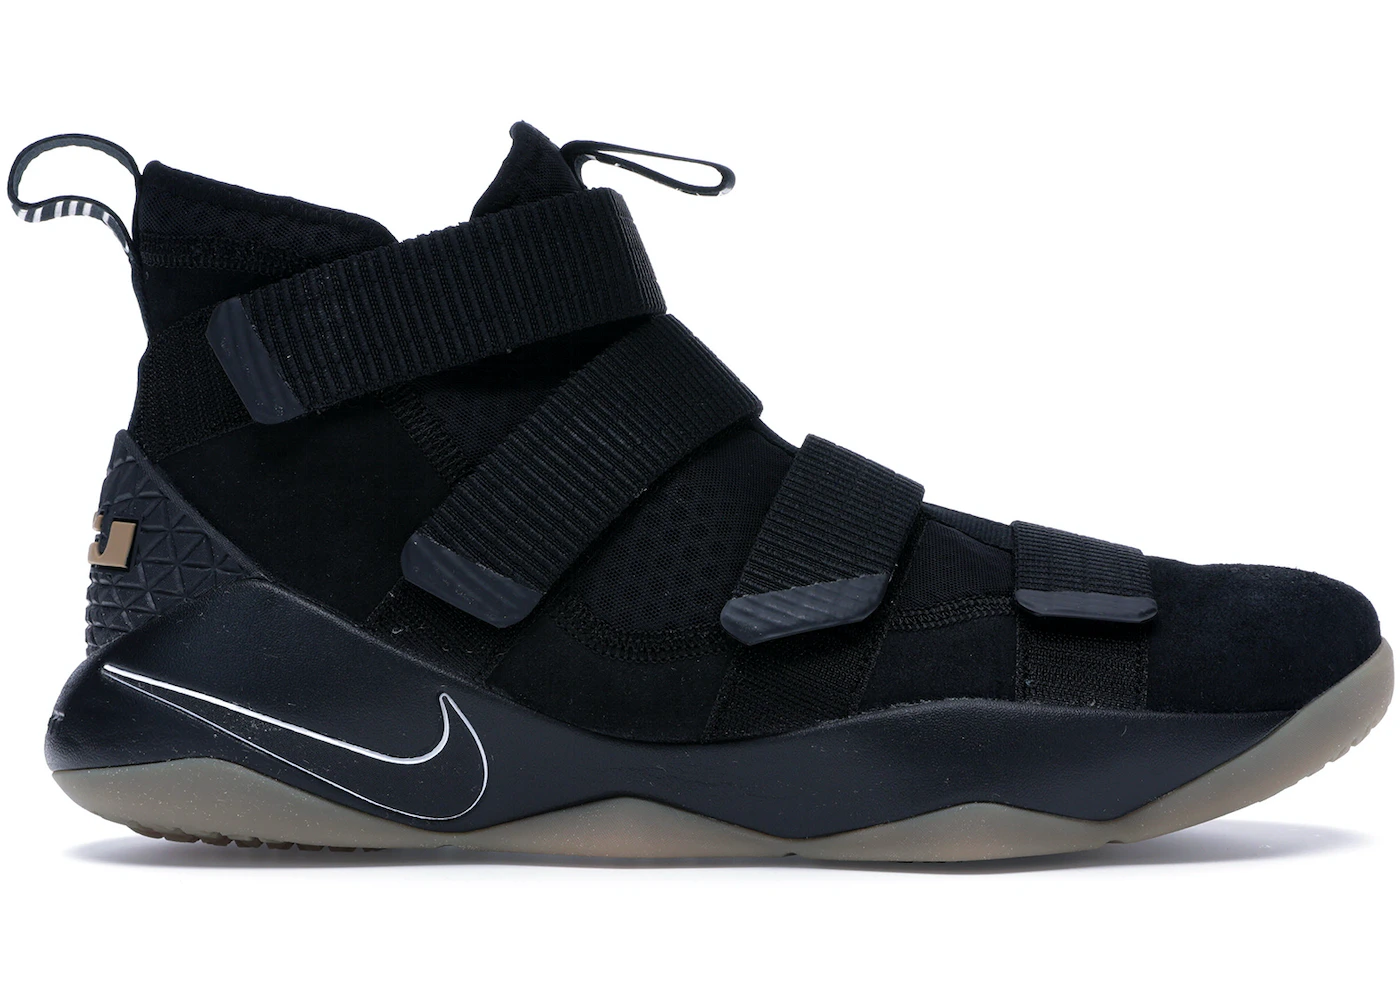 Lebron Soldier 11 Negro | peacecommission.kdsg.gov.ng